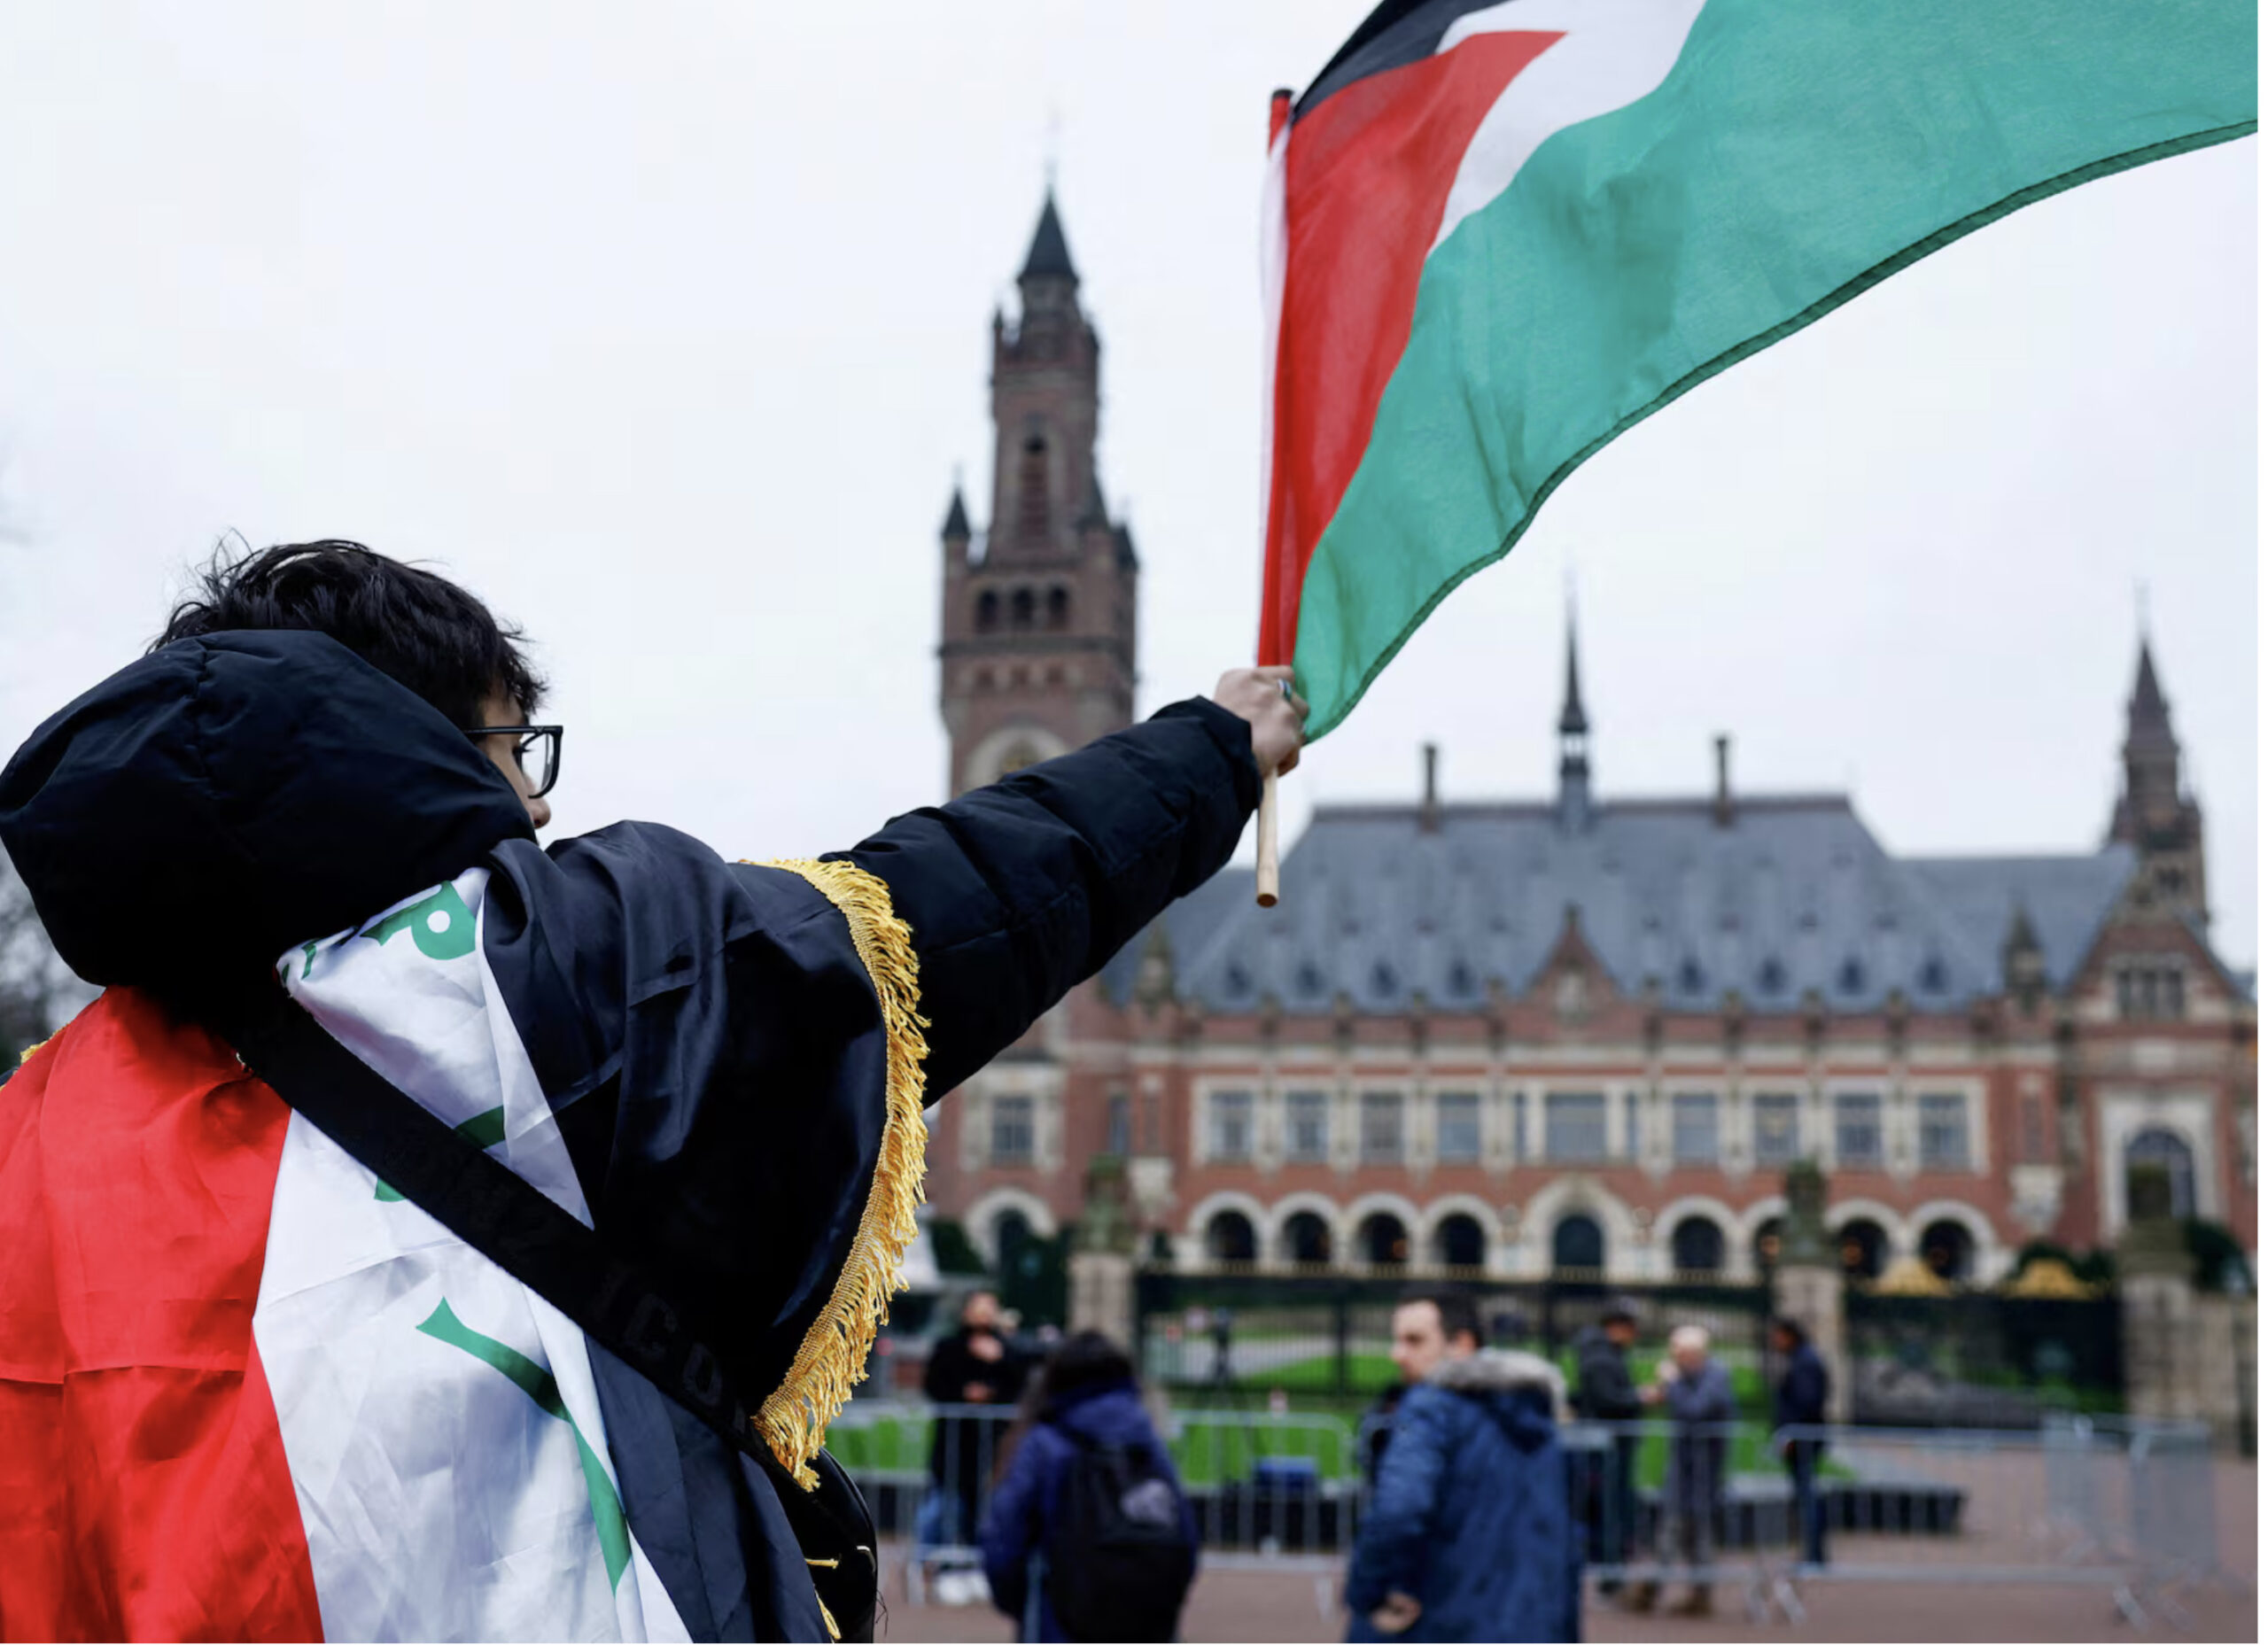 A man waves a Palestinian flag as people protest on the day of a public hearing held by The International Court of Justice (ICJ) to allow parties to give their views on the legal consequences of Israel's occupation of Palestinian territories before eventually issuing a non-binding legal opinion, in The Hague, Netherlands, February 21. – Reuters